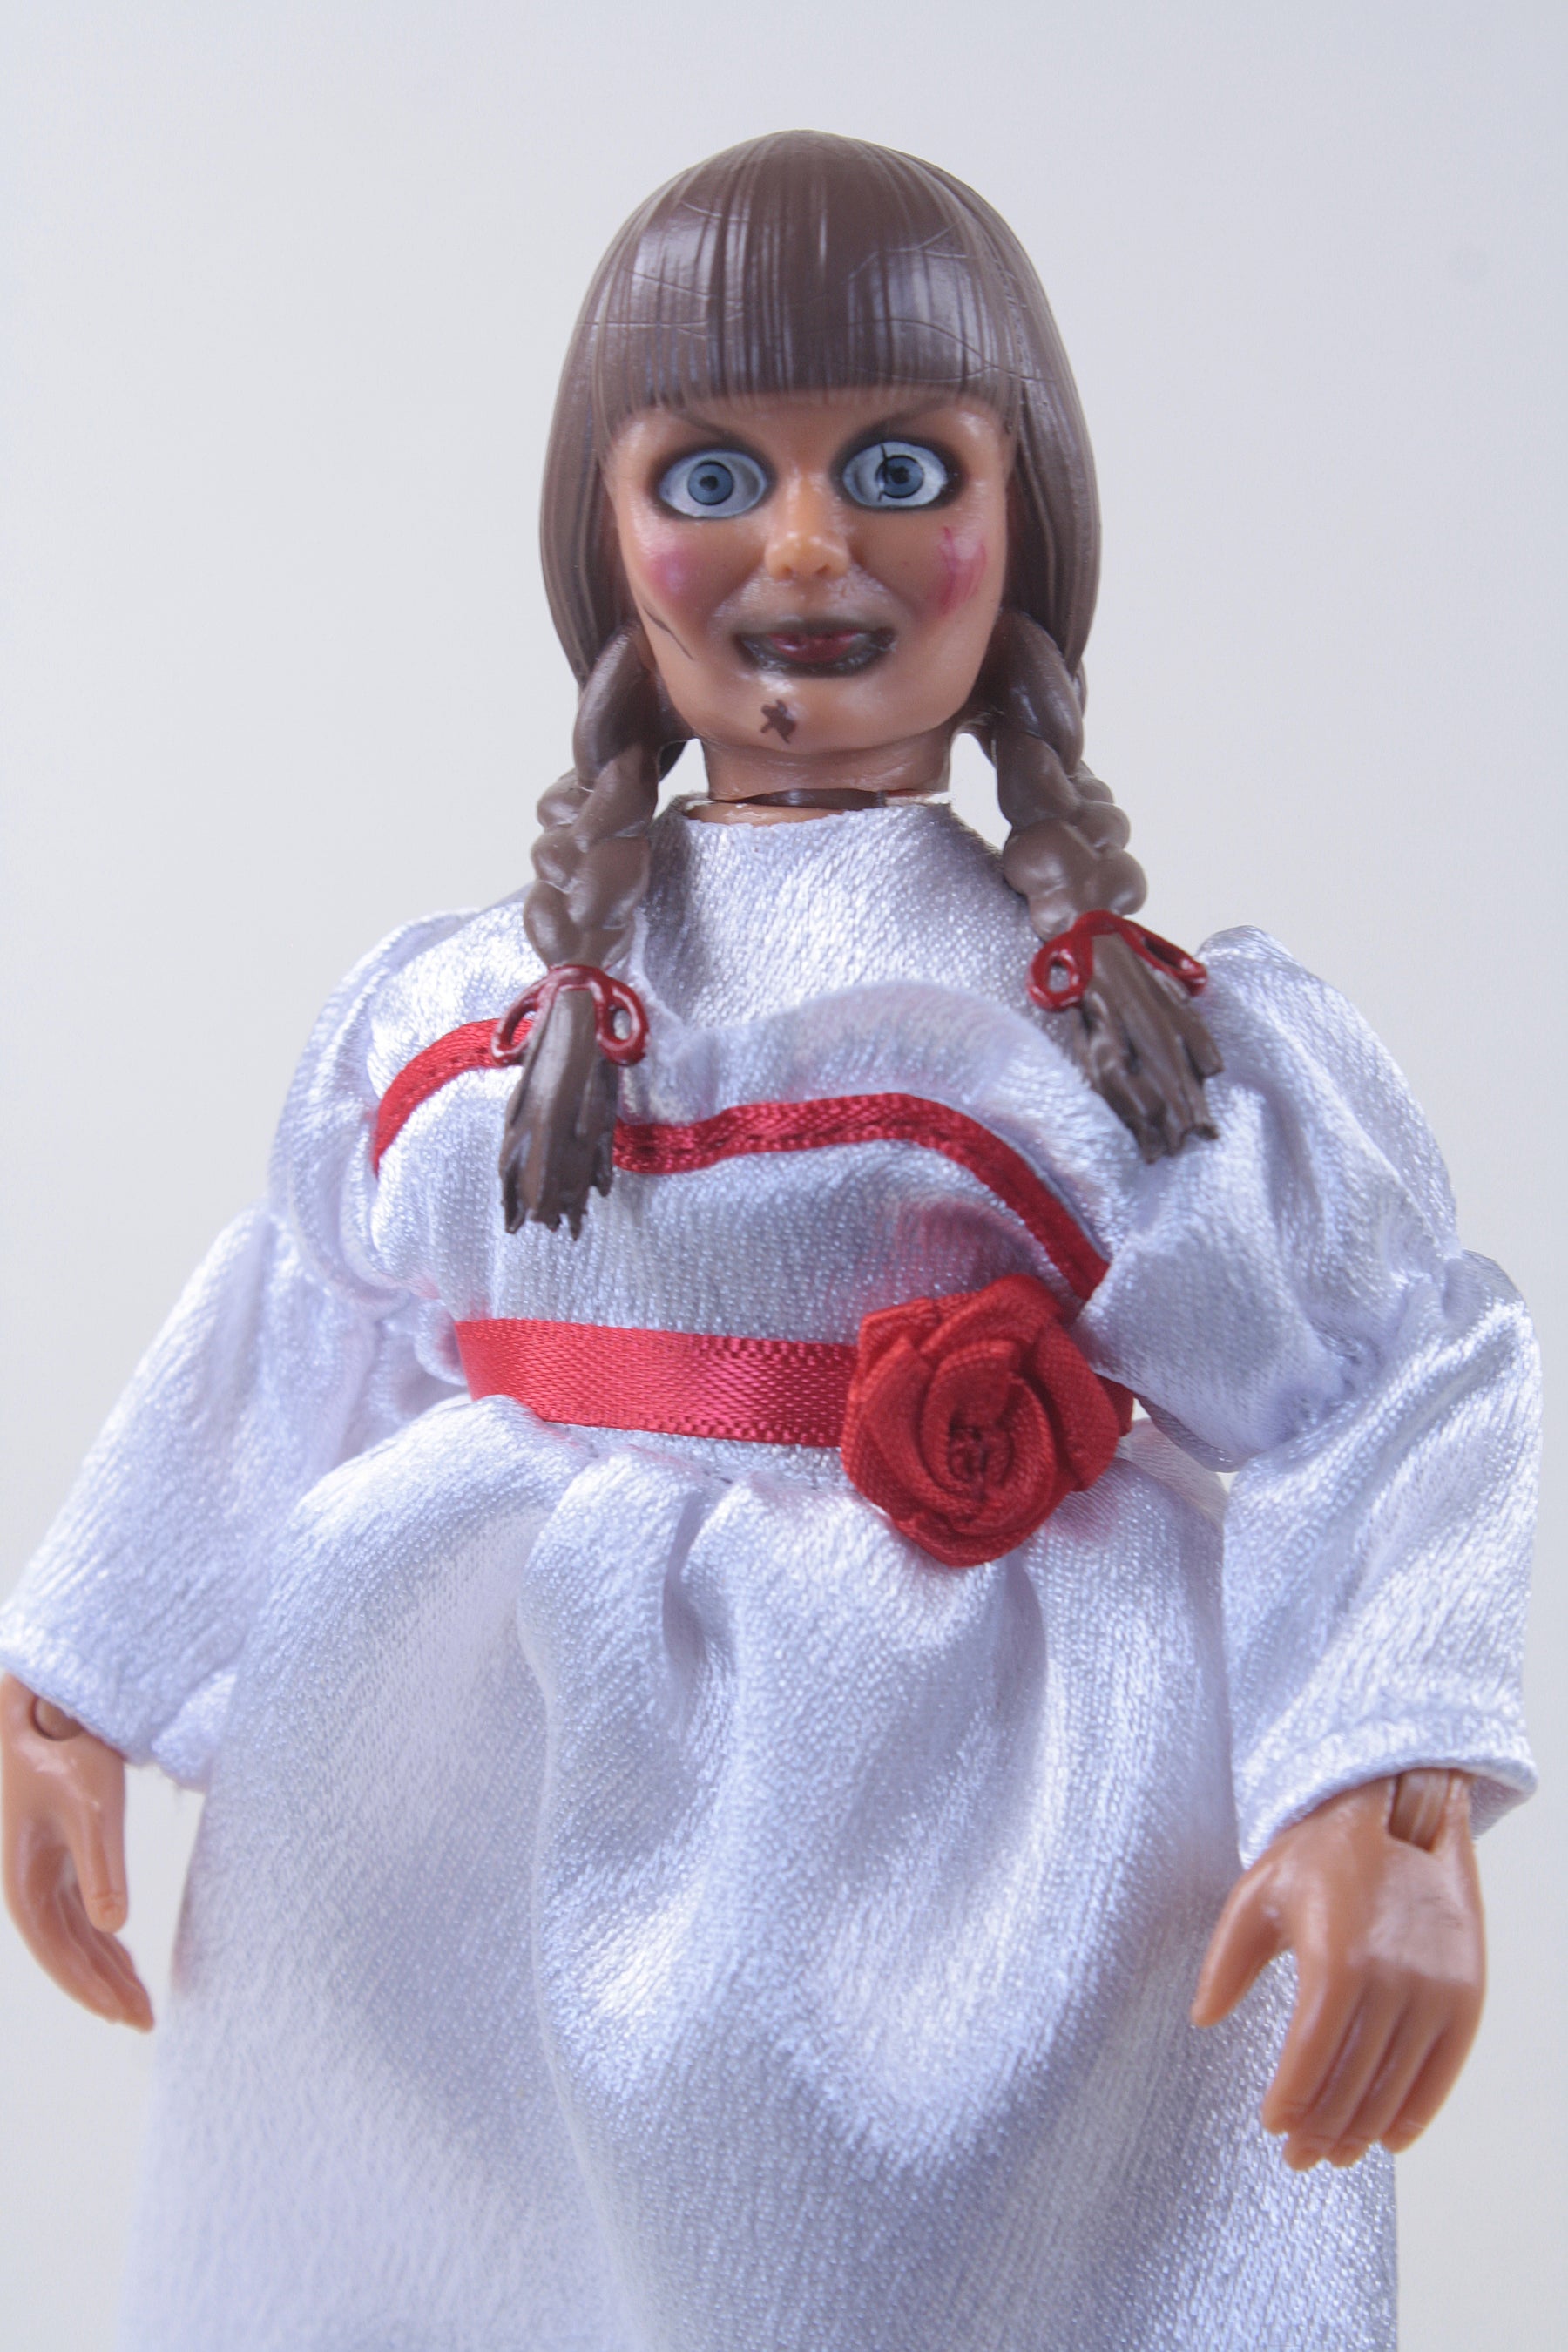 Mego Horror Wave 18 - The Conjuring Universe - Annabelle Comes Home 8" Action Figure